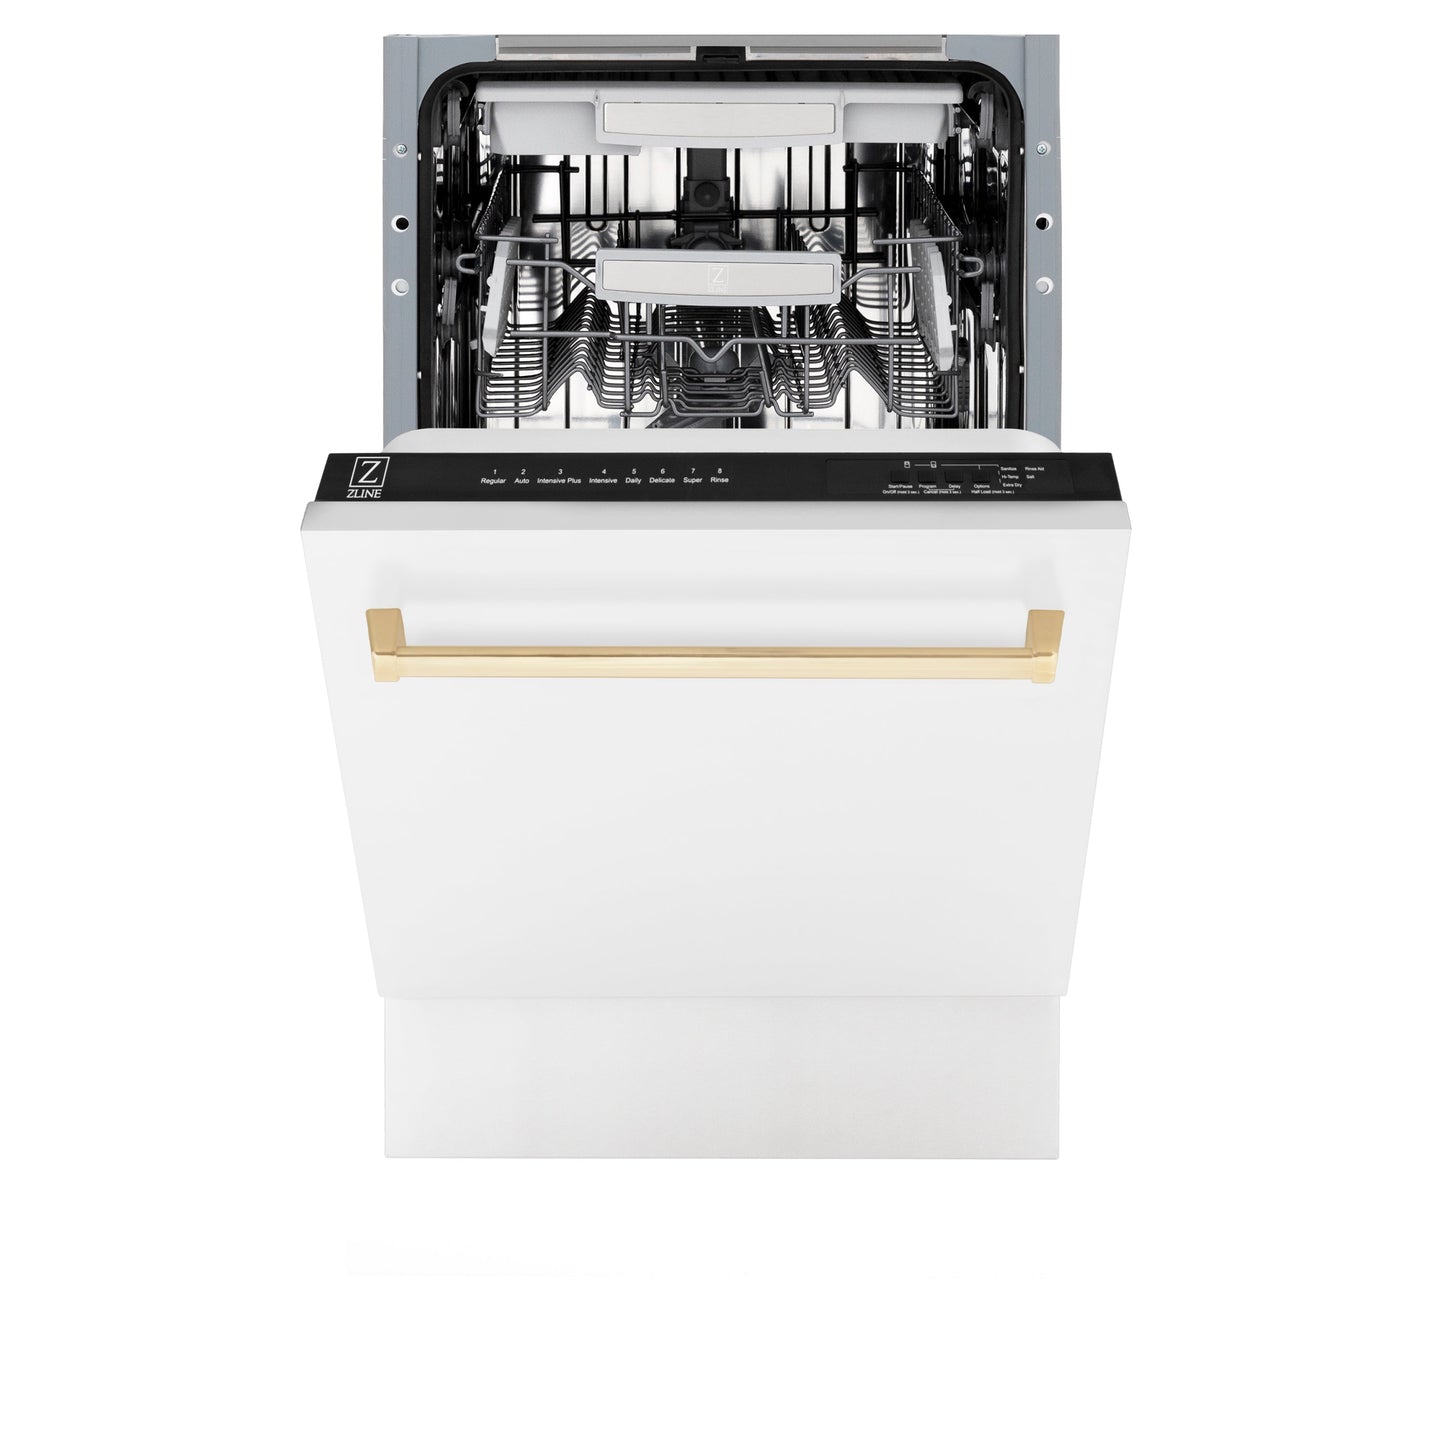 ZLINE Autograph Edition 18” Compact 3rd Rack Top Control Dishwasher in White Matte with Polished Gold Accent Handle, 51dBa (DWVZ-WM-18-G)